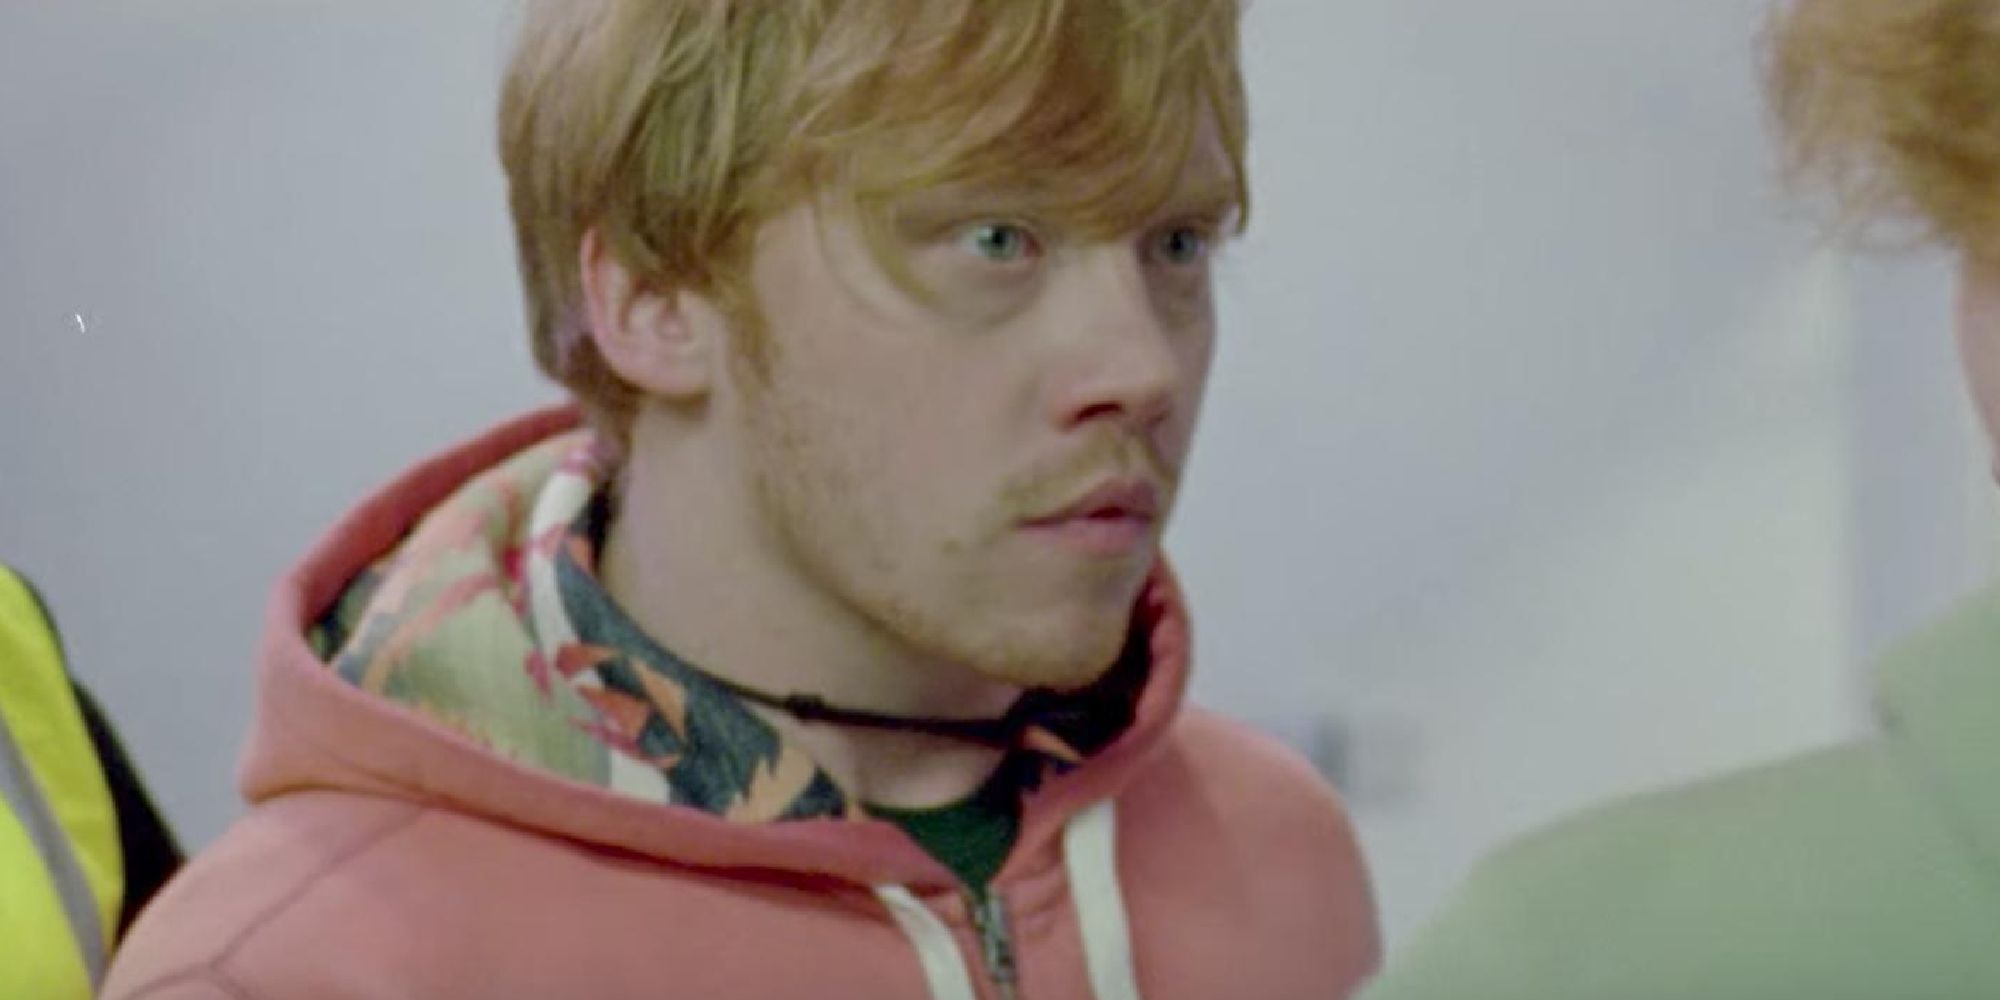 Rupert Grint meeting Ed Sheeran at the end of the Lego House music video